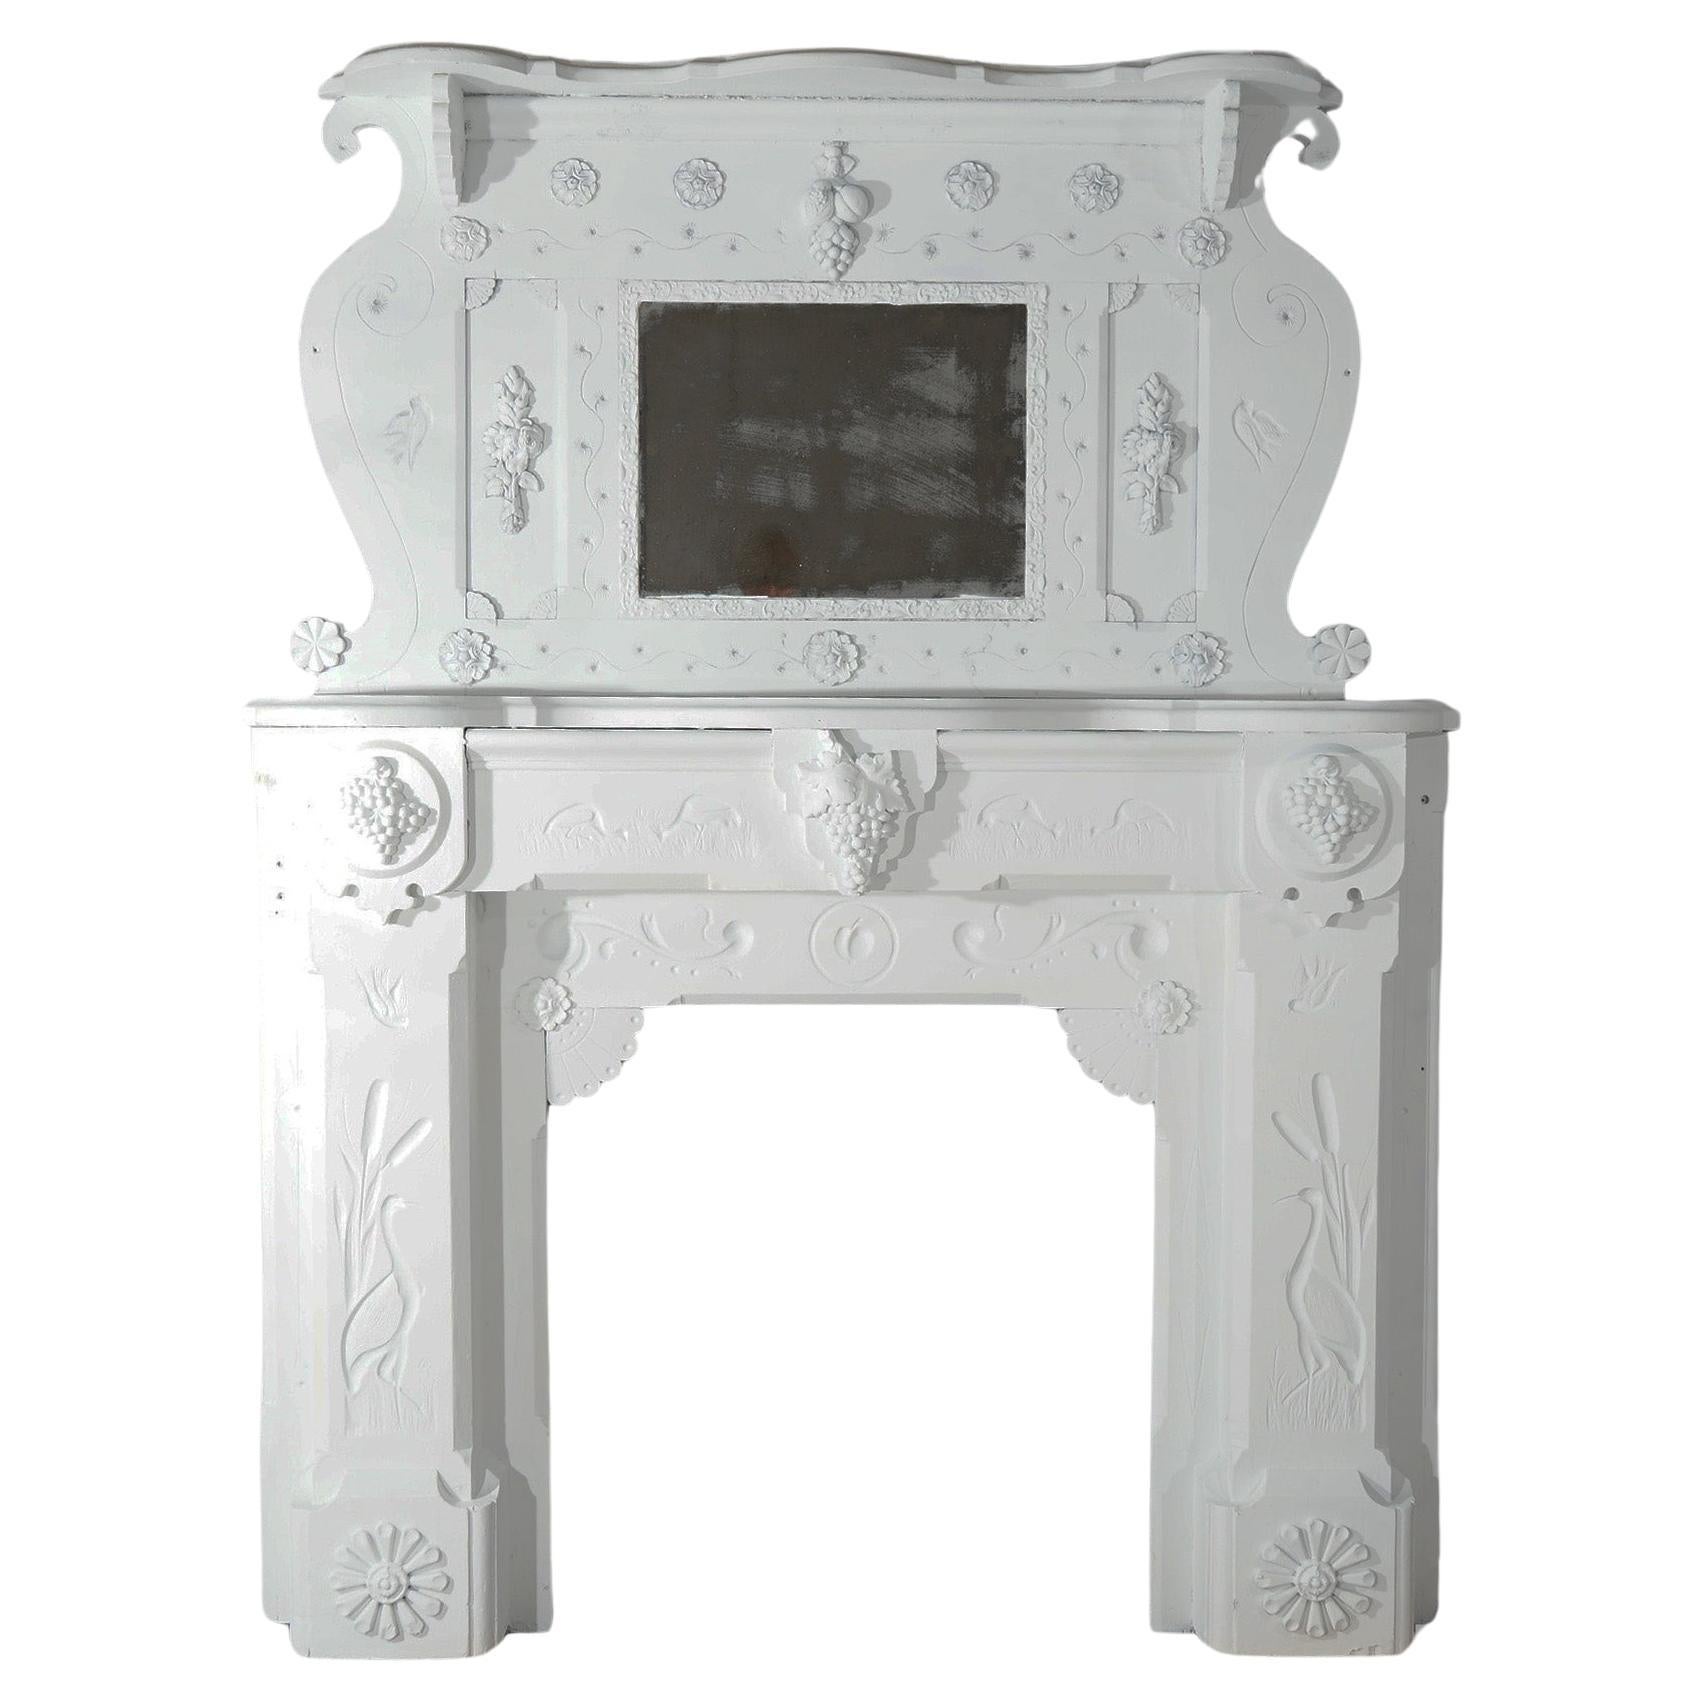 Antique Figural Carved & Mirrored Fireplace Mantel C1890